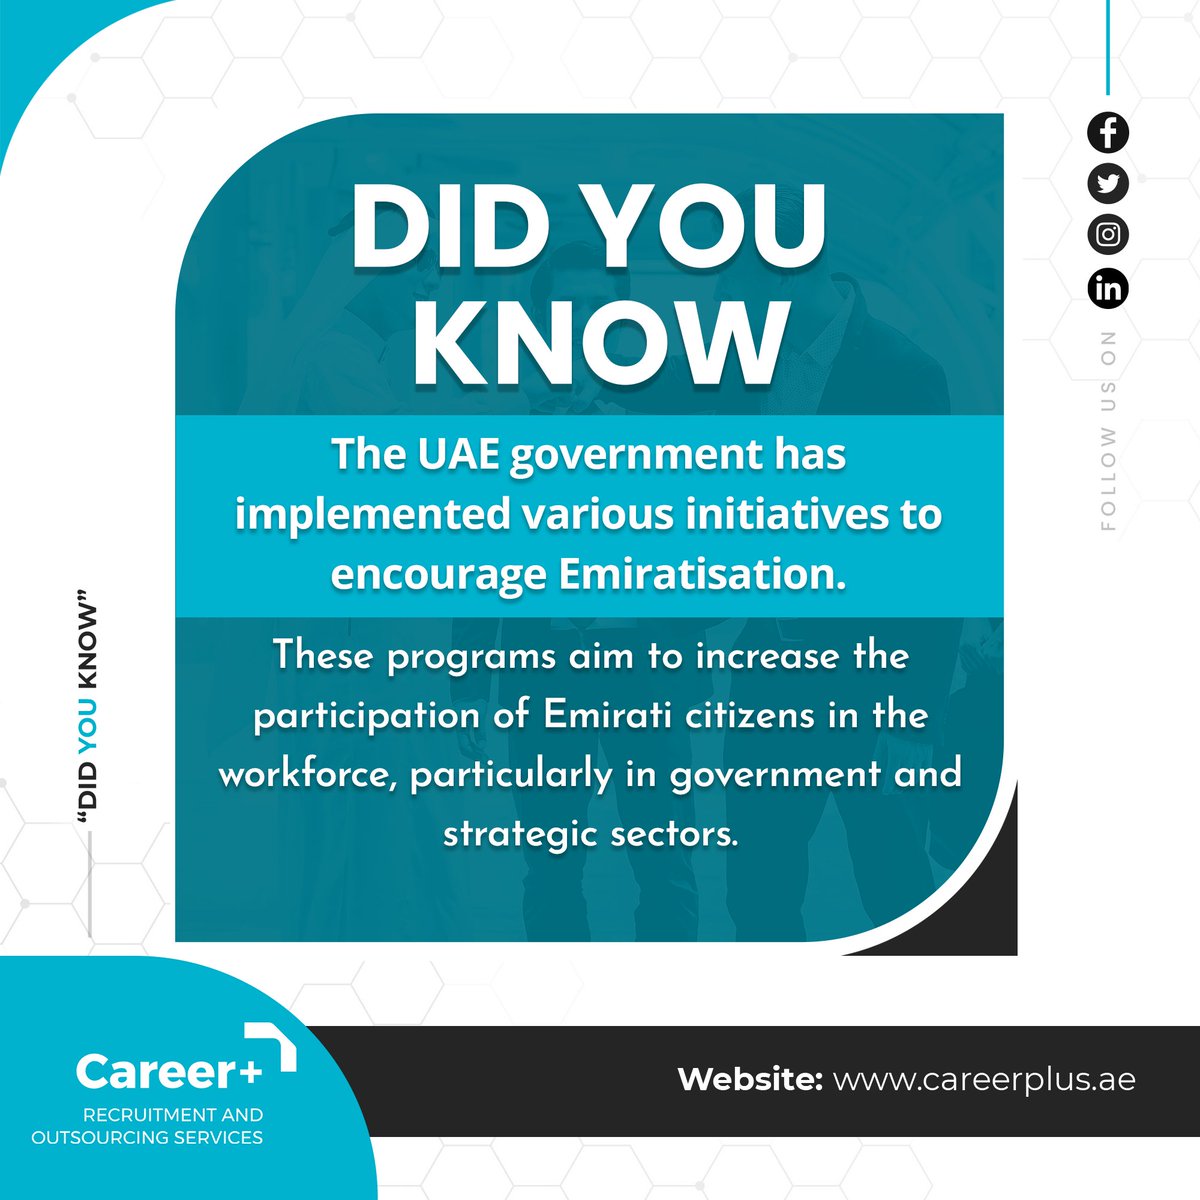 The opportunities for Emiratis in the UAE have been expanded with various initiatives by the government.
.
.
#careerplus #recruitementagency